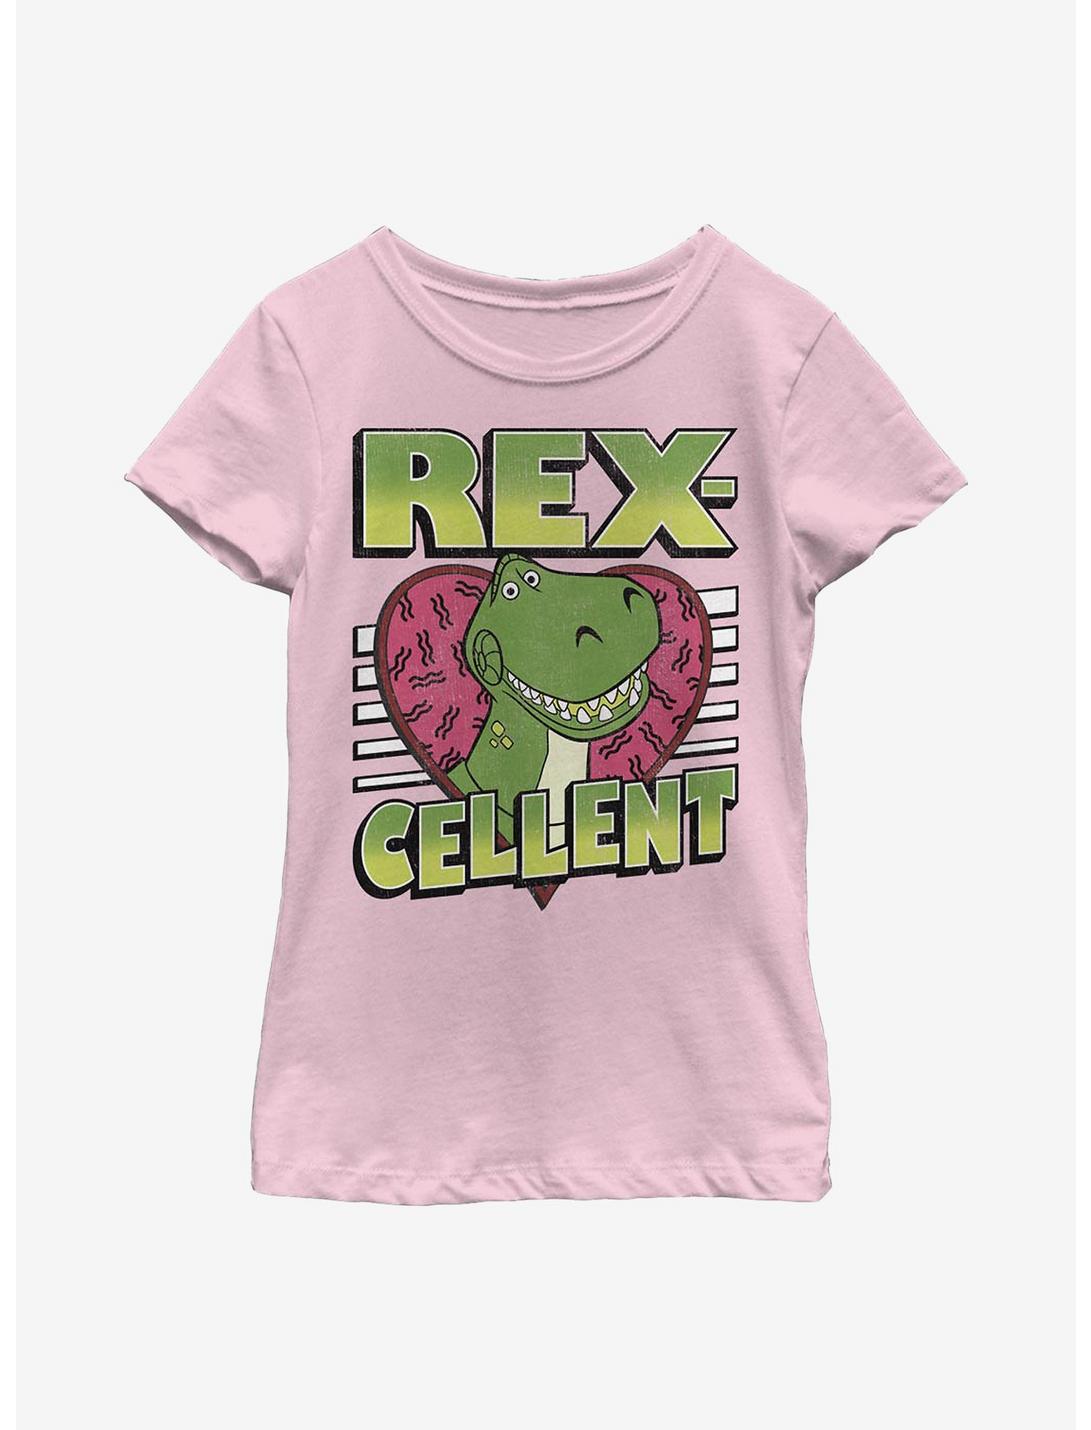 Disney Pixar Toy Story Rexcellent Heart Youth Girls T-Shirt, PINK, hi-res